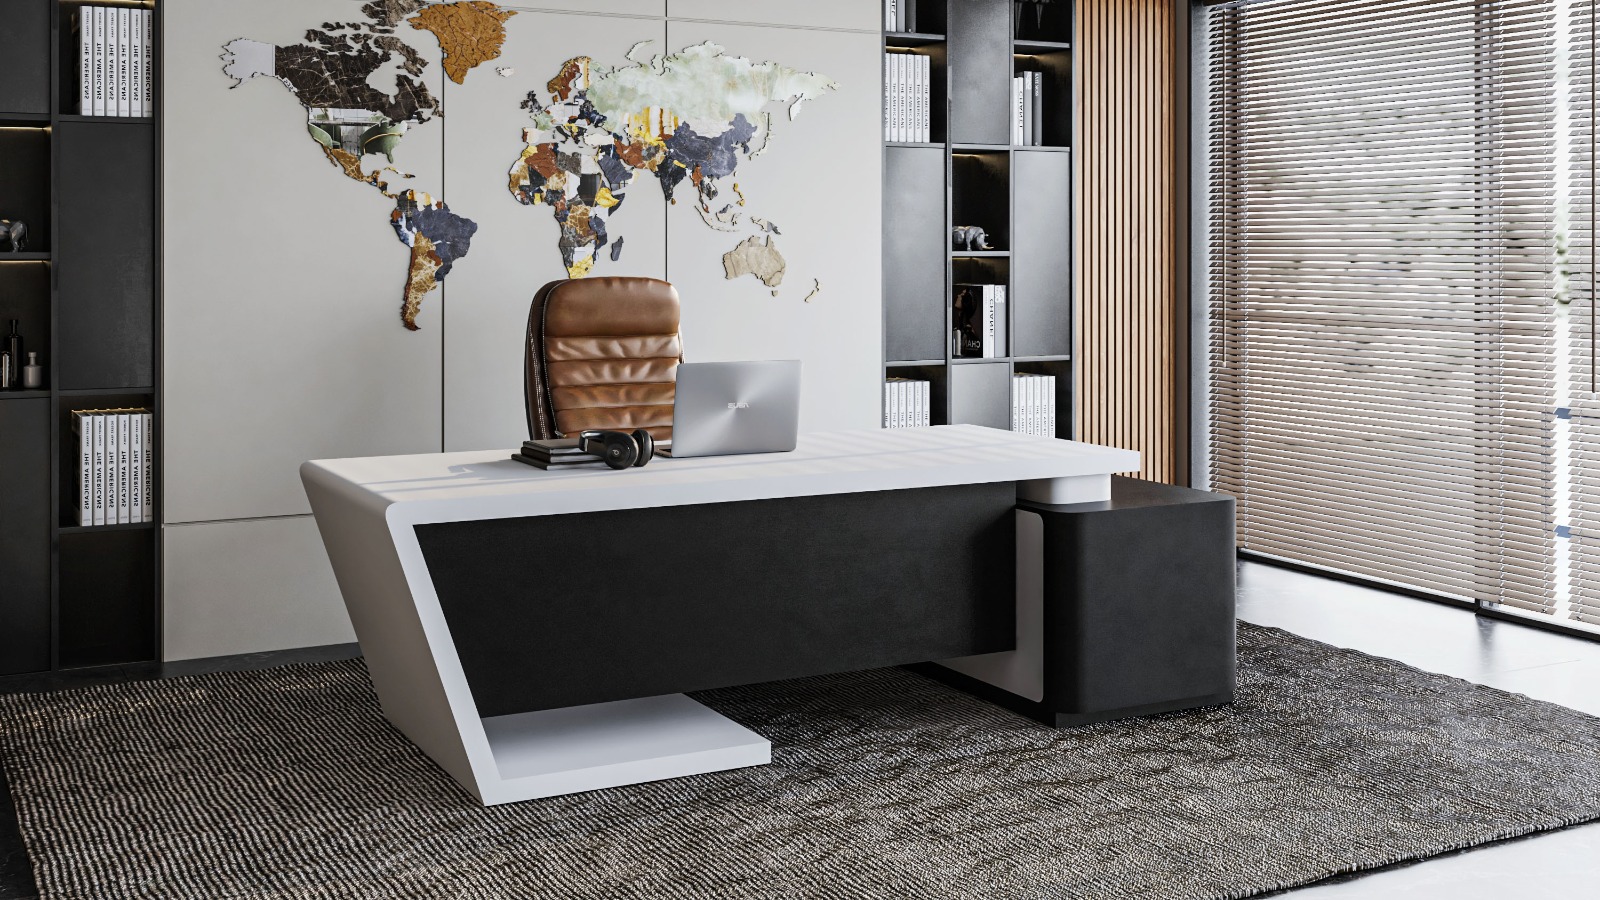 Unique Shaped Executive Desk - office furniture collections